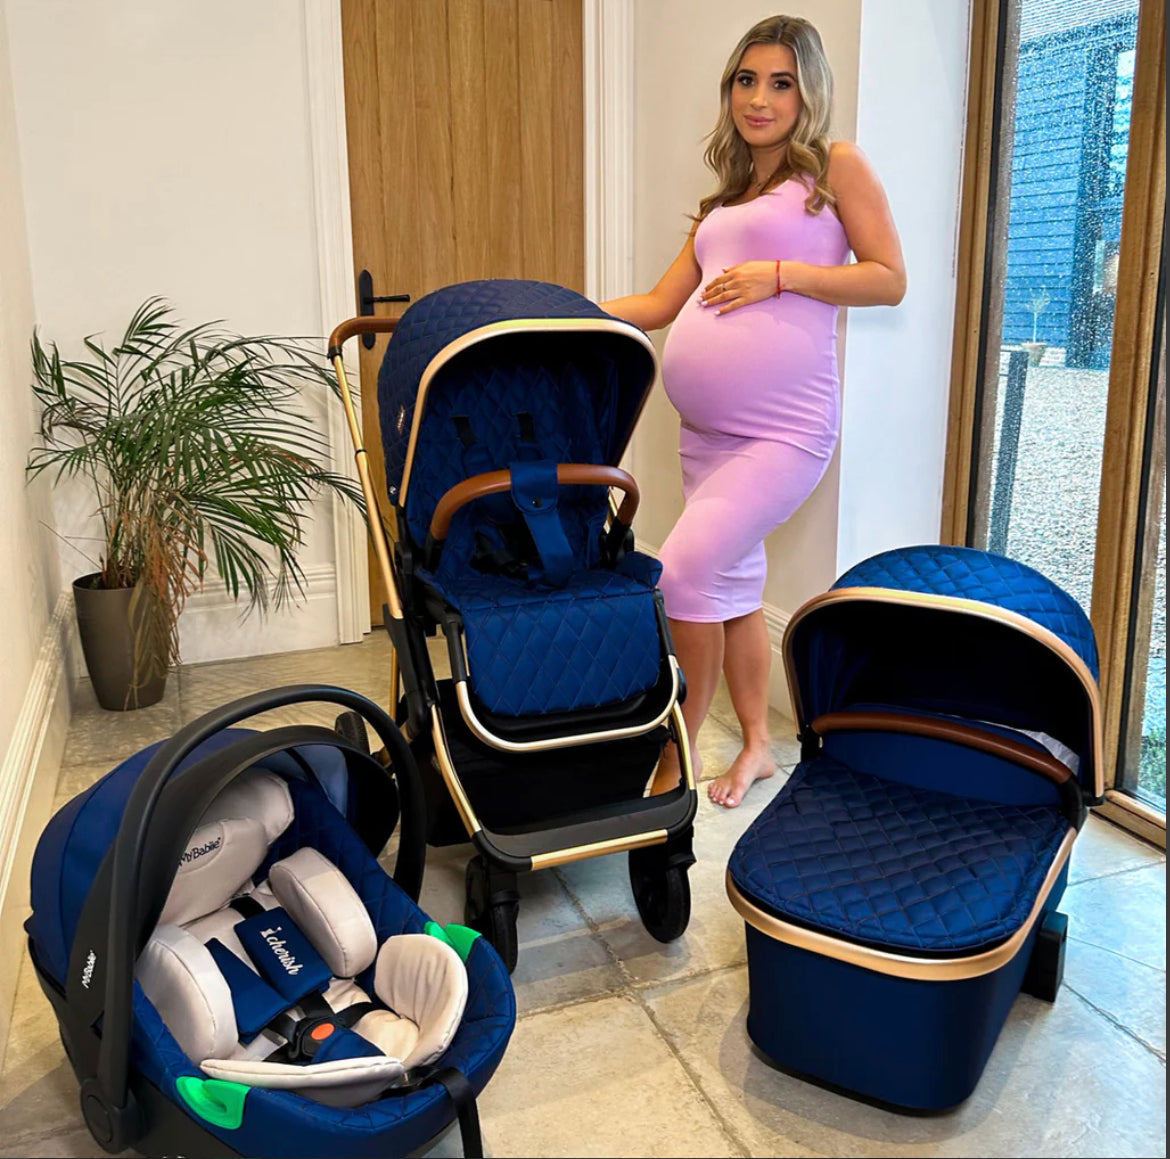 MB500i 3-in-1 Travel System with i-Size Car Seat - Dani Dyer Opal Blue